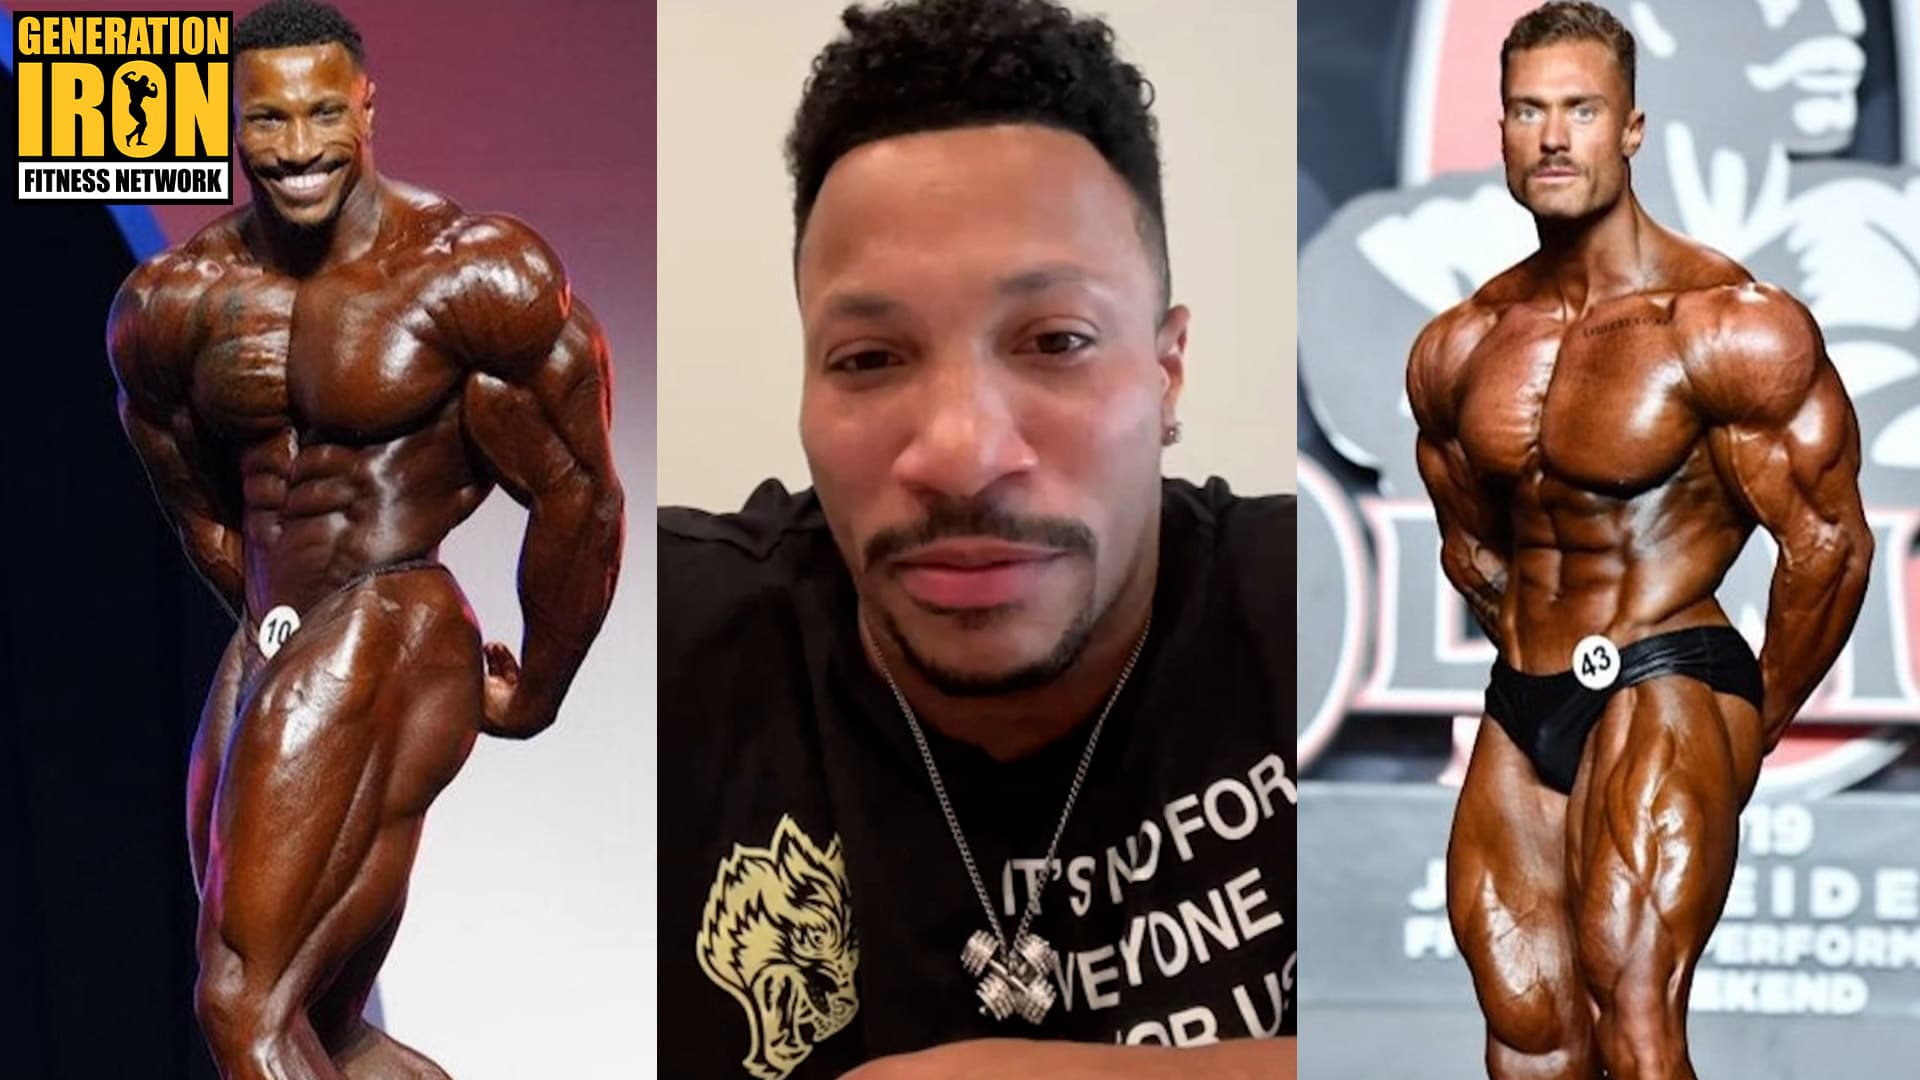 Patrick Moore Explains The Reason It’s Offensive To Suggest He Move To Classic Physique